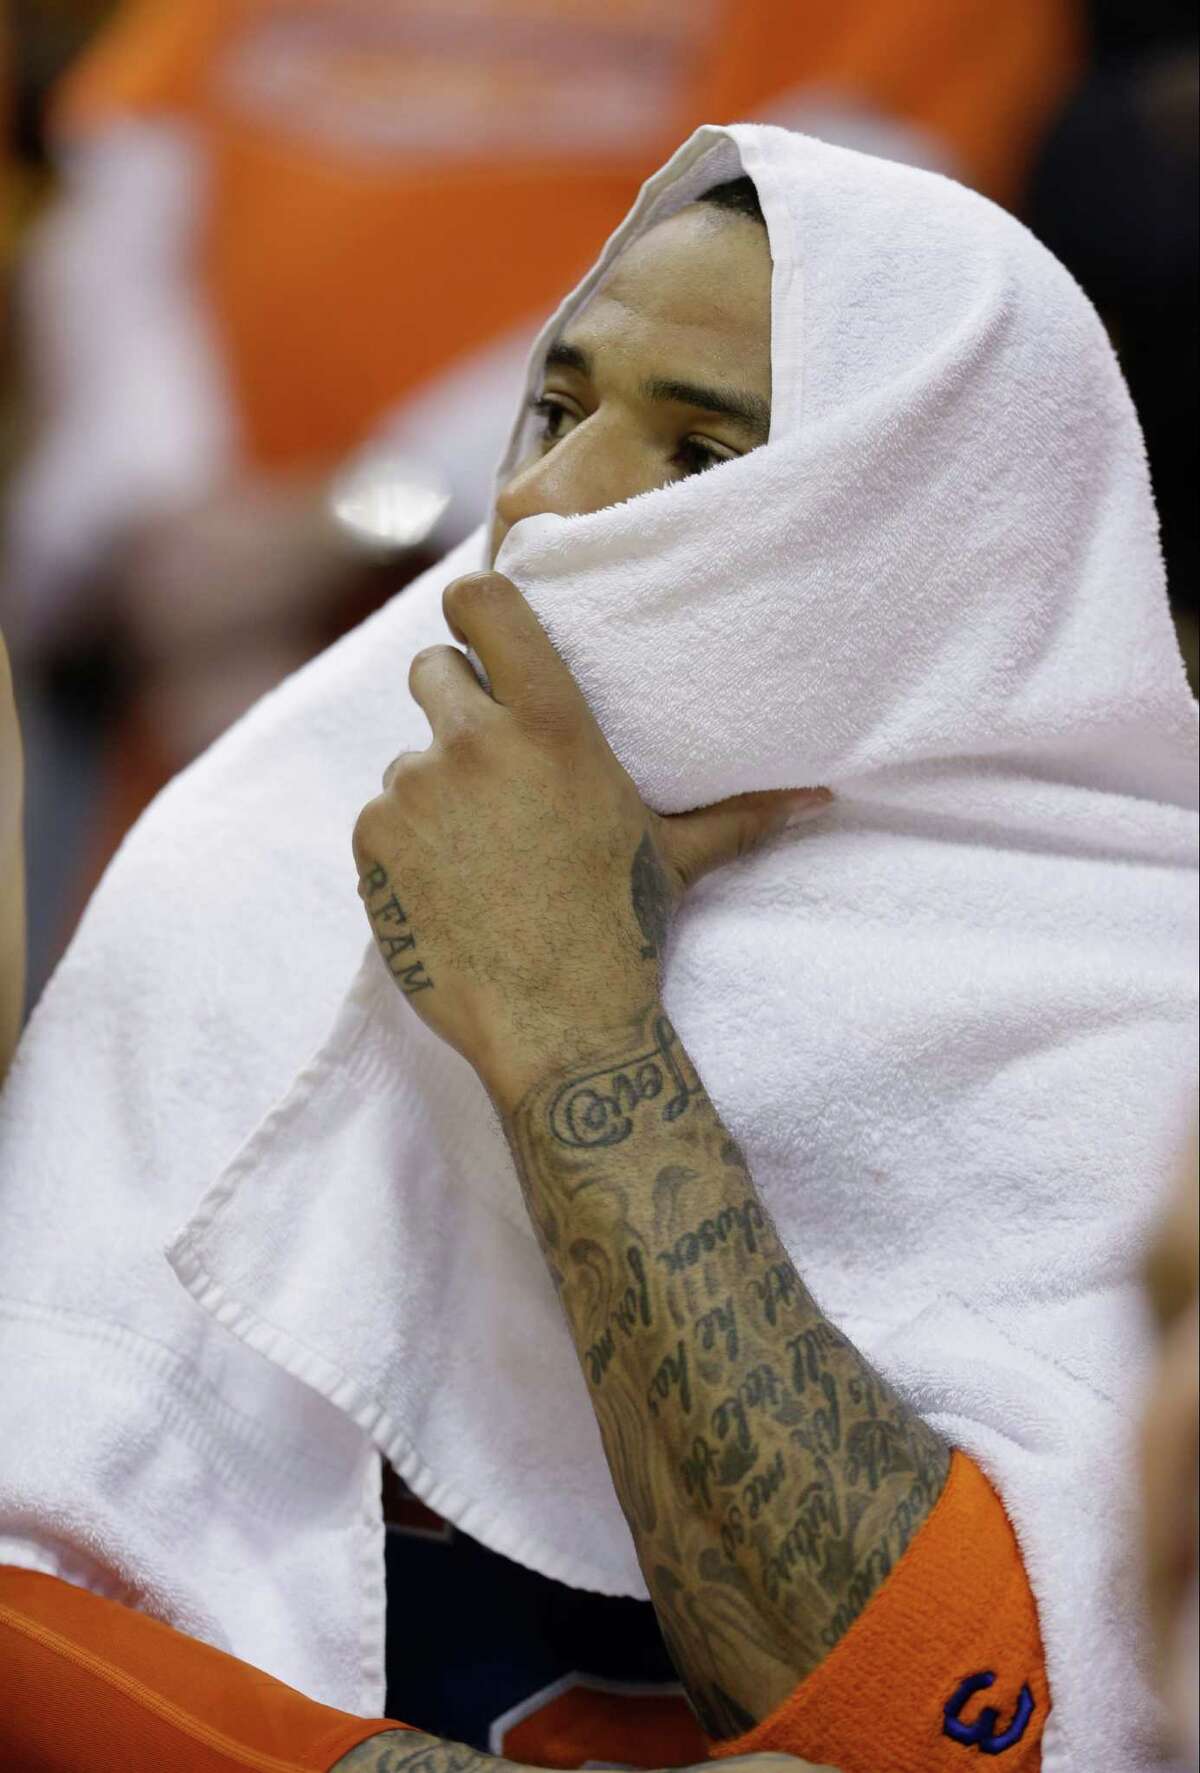 New York Knicks' Kenyon Martin (3) watches during the second half of Game 6 of an Eastern Conference semifinal NBA basketball playoff series against the Indiana Pacers Saturday, May 18, 2013, in Indianapolis. Indiana defeated New York 106-99. (AP Photo/Darron Cummings)